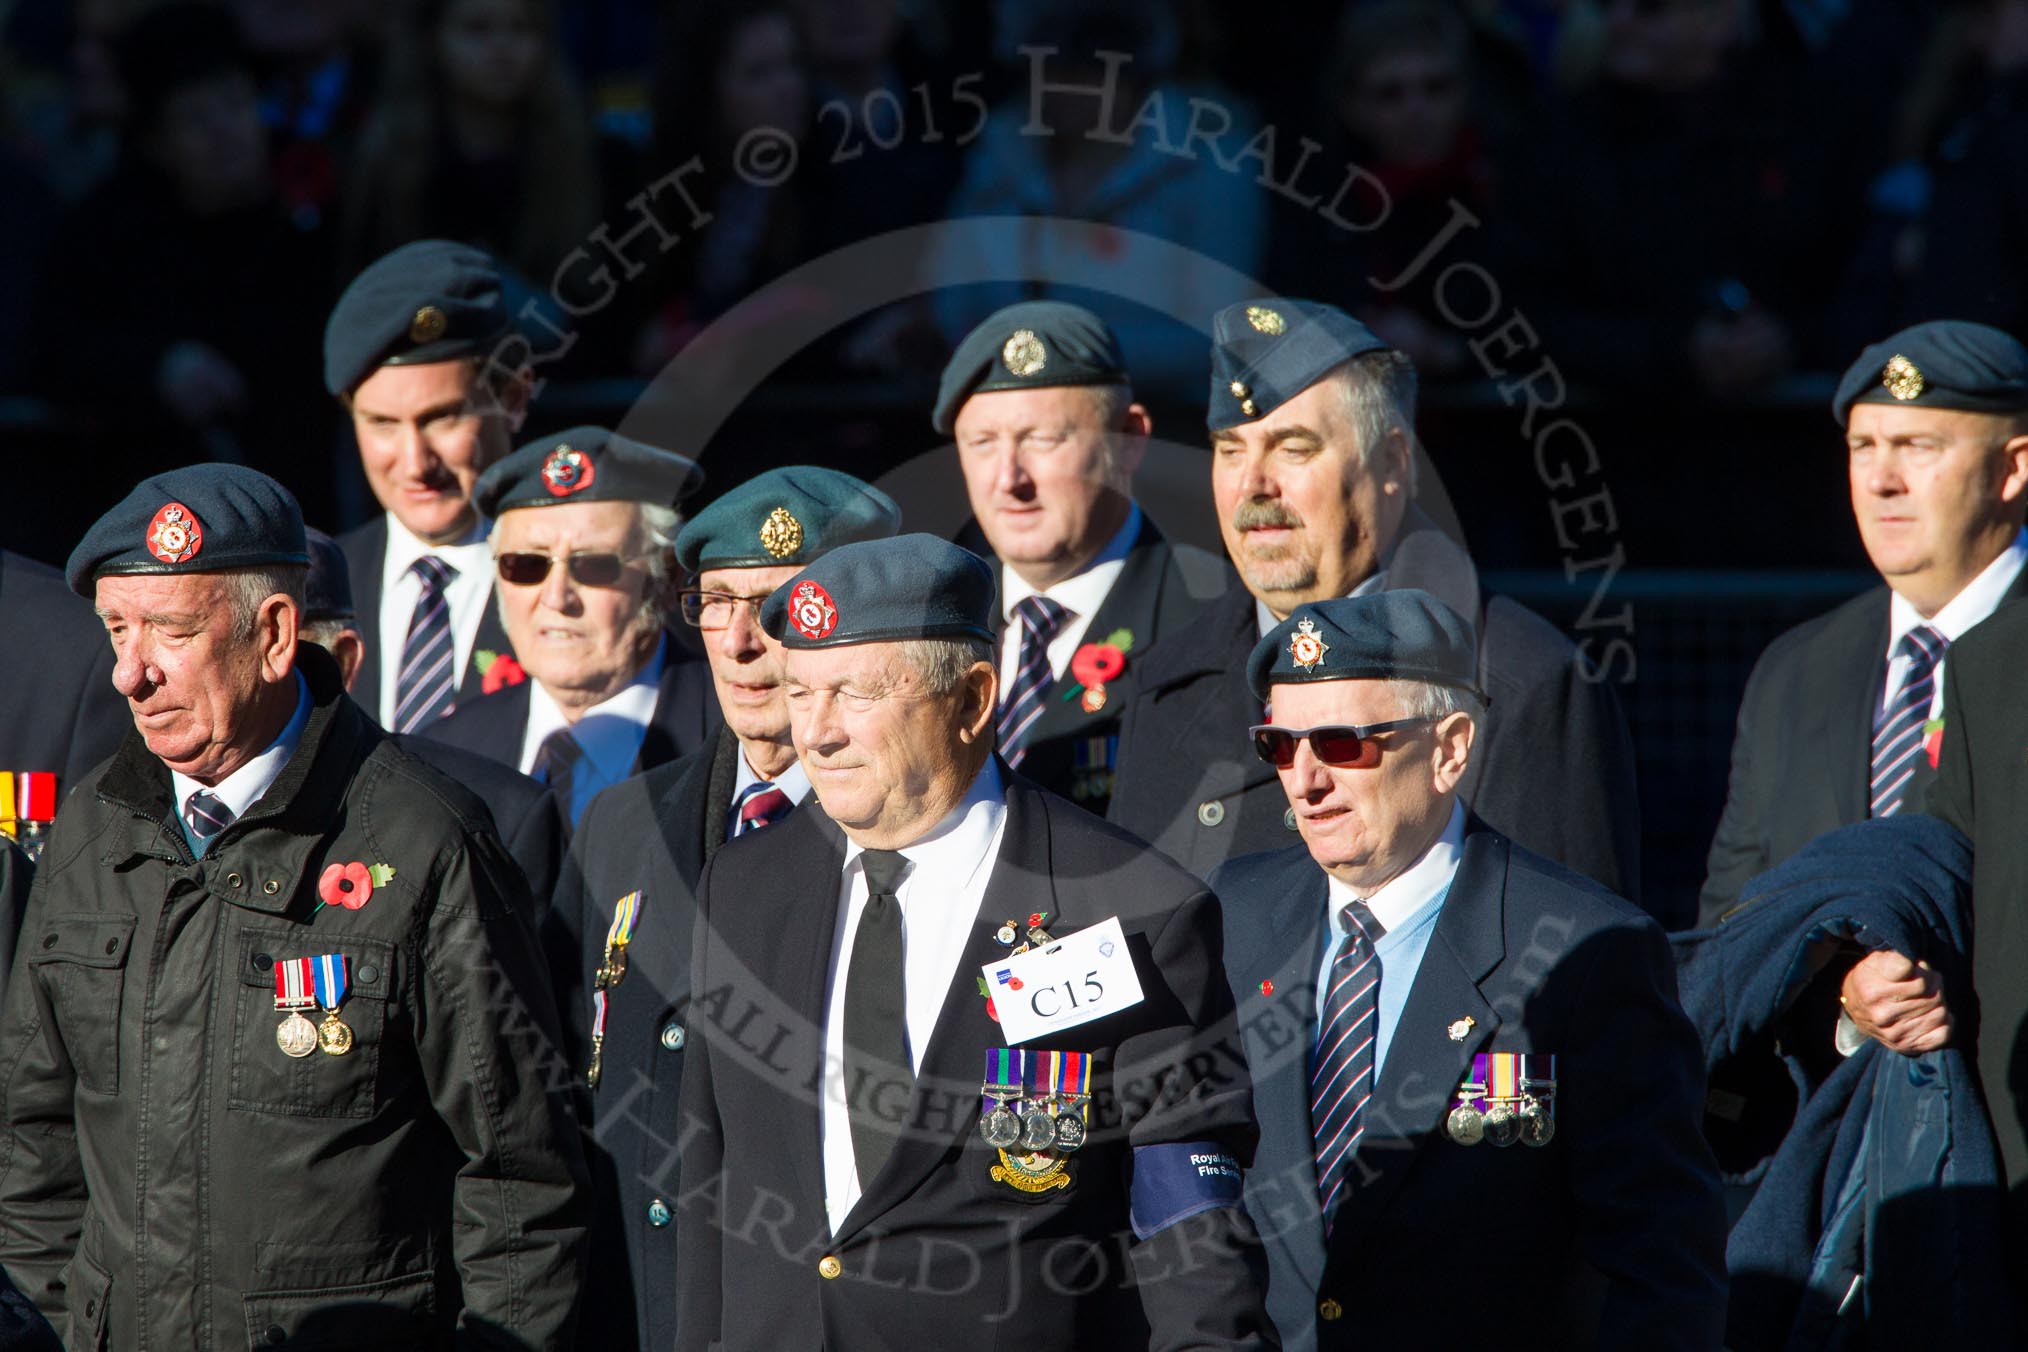 Remembrance Sunday Cenotaph March Past 2013: C15 - Royal Air Force & Defence Fire Services Association..
Press stand opposite the Foreign Office building, Whitehall, London SW1,
London,
Greater London,
United Kingdom,
on 10 November 2013 at 12:08, image #1807